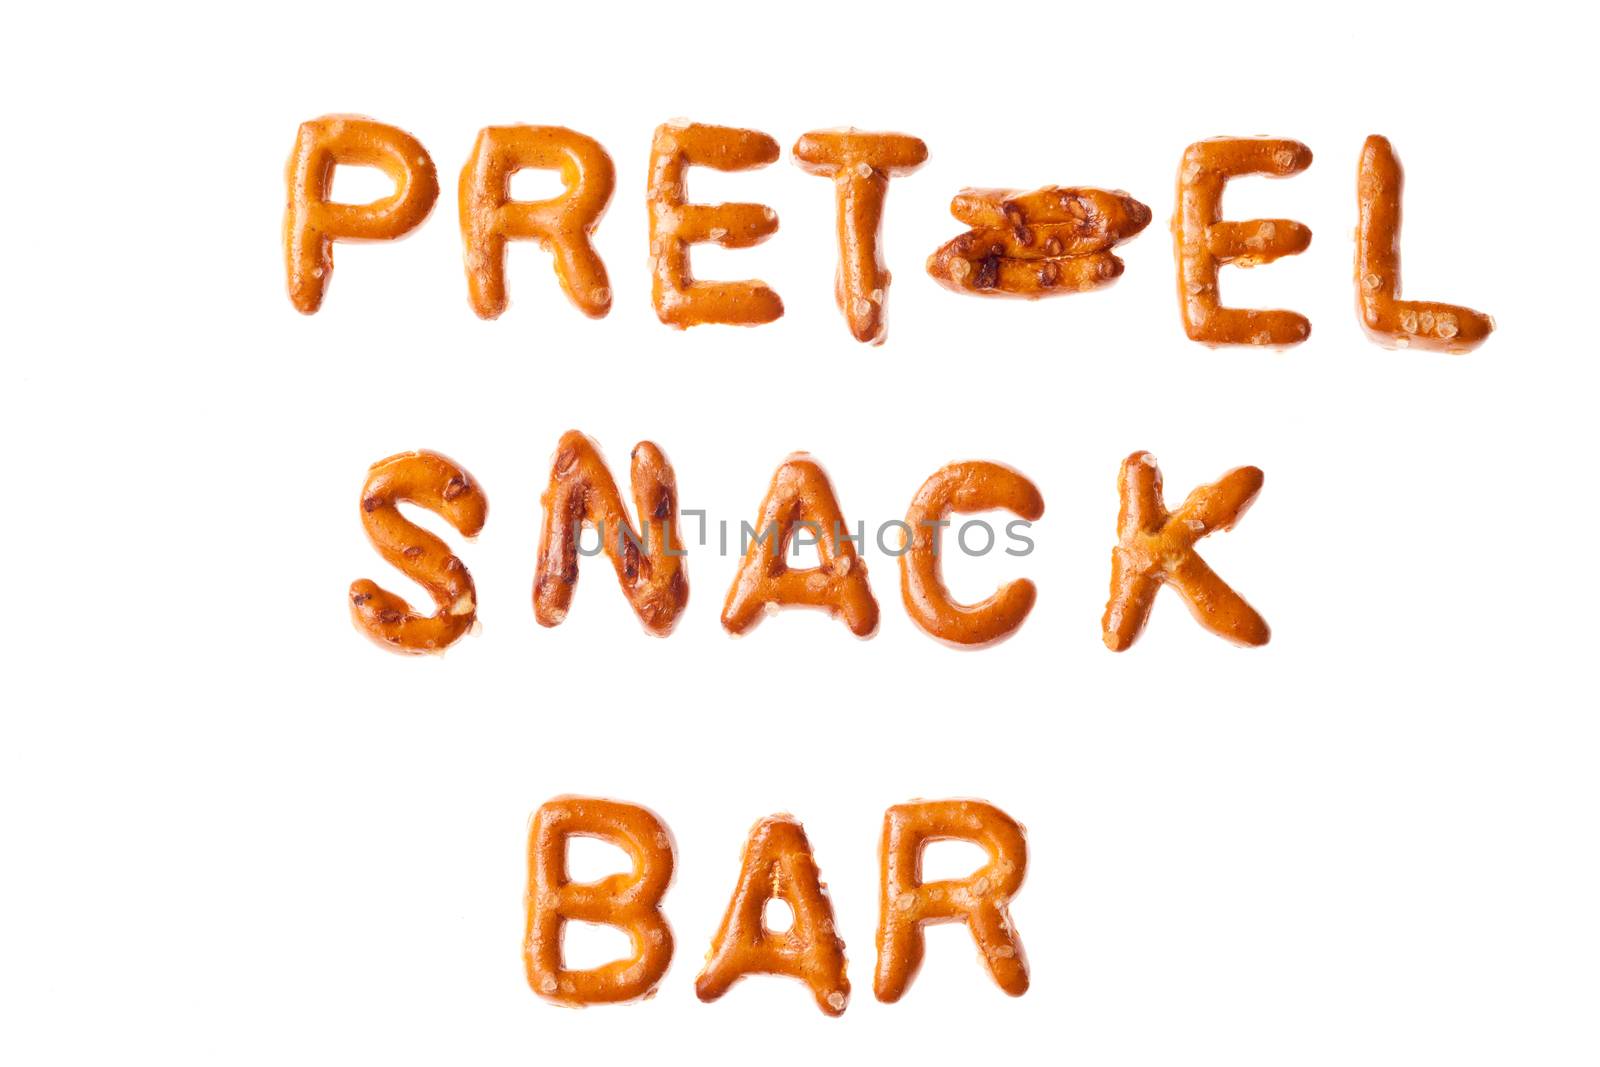 Words PRETZEL SNACK BAR written, laid-out, with crispy alphabet pretzels isolated on white background